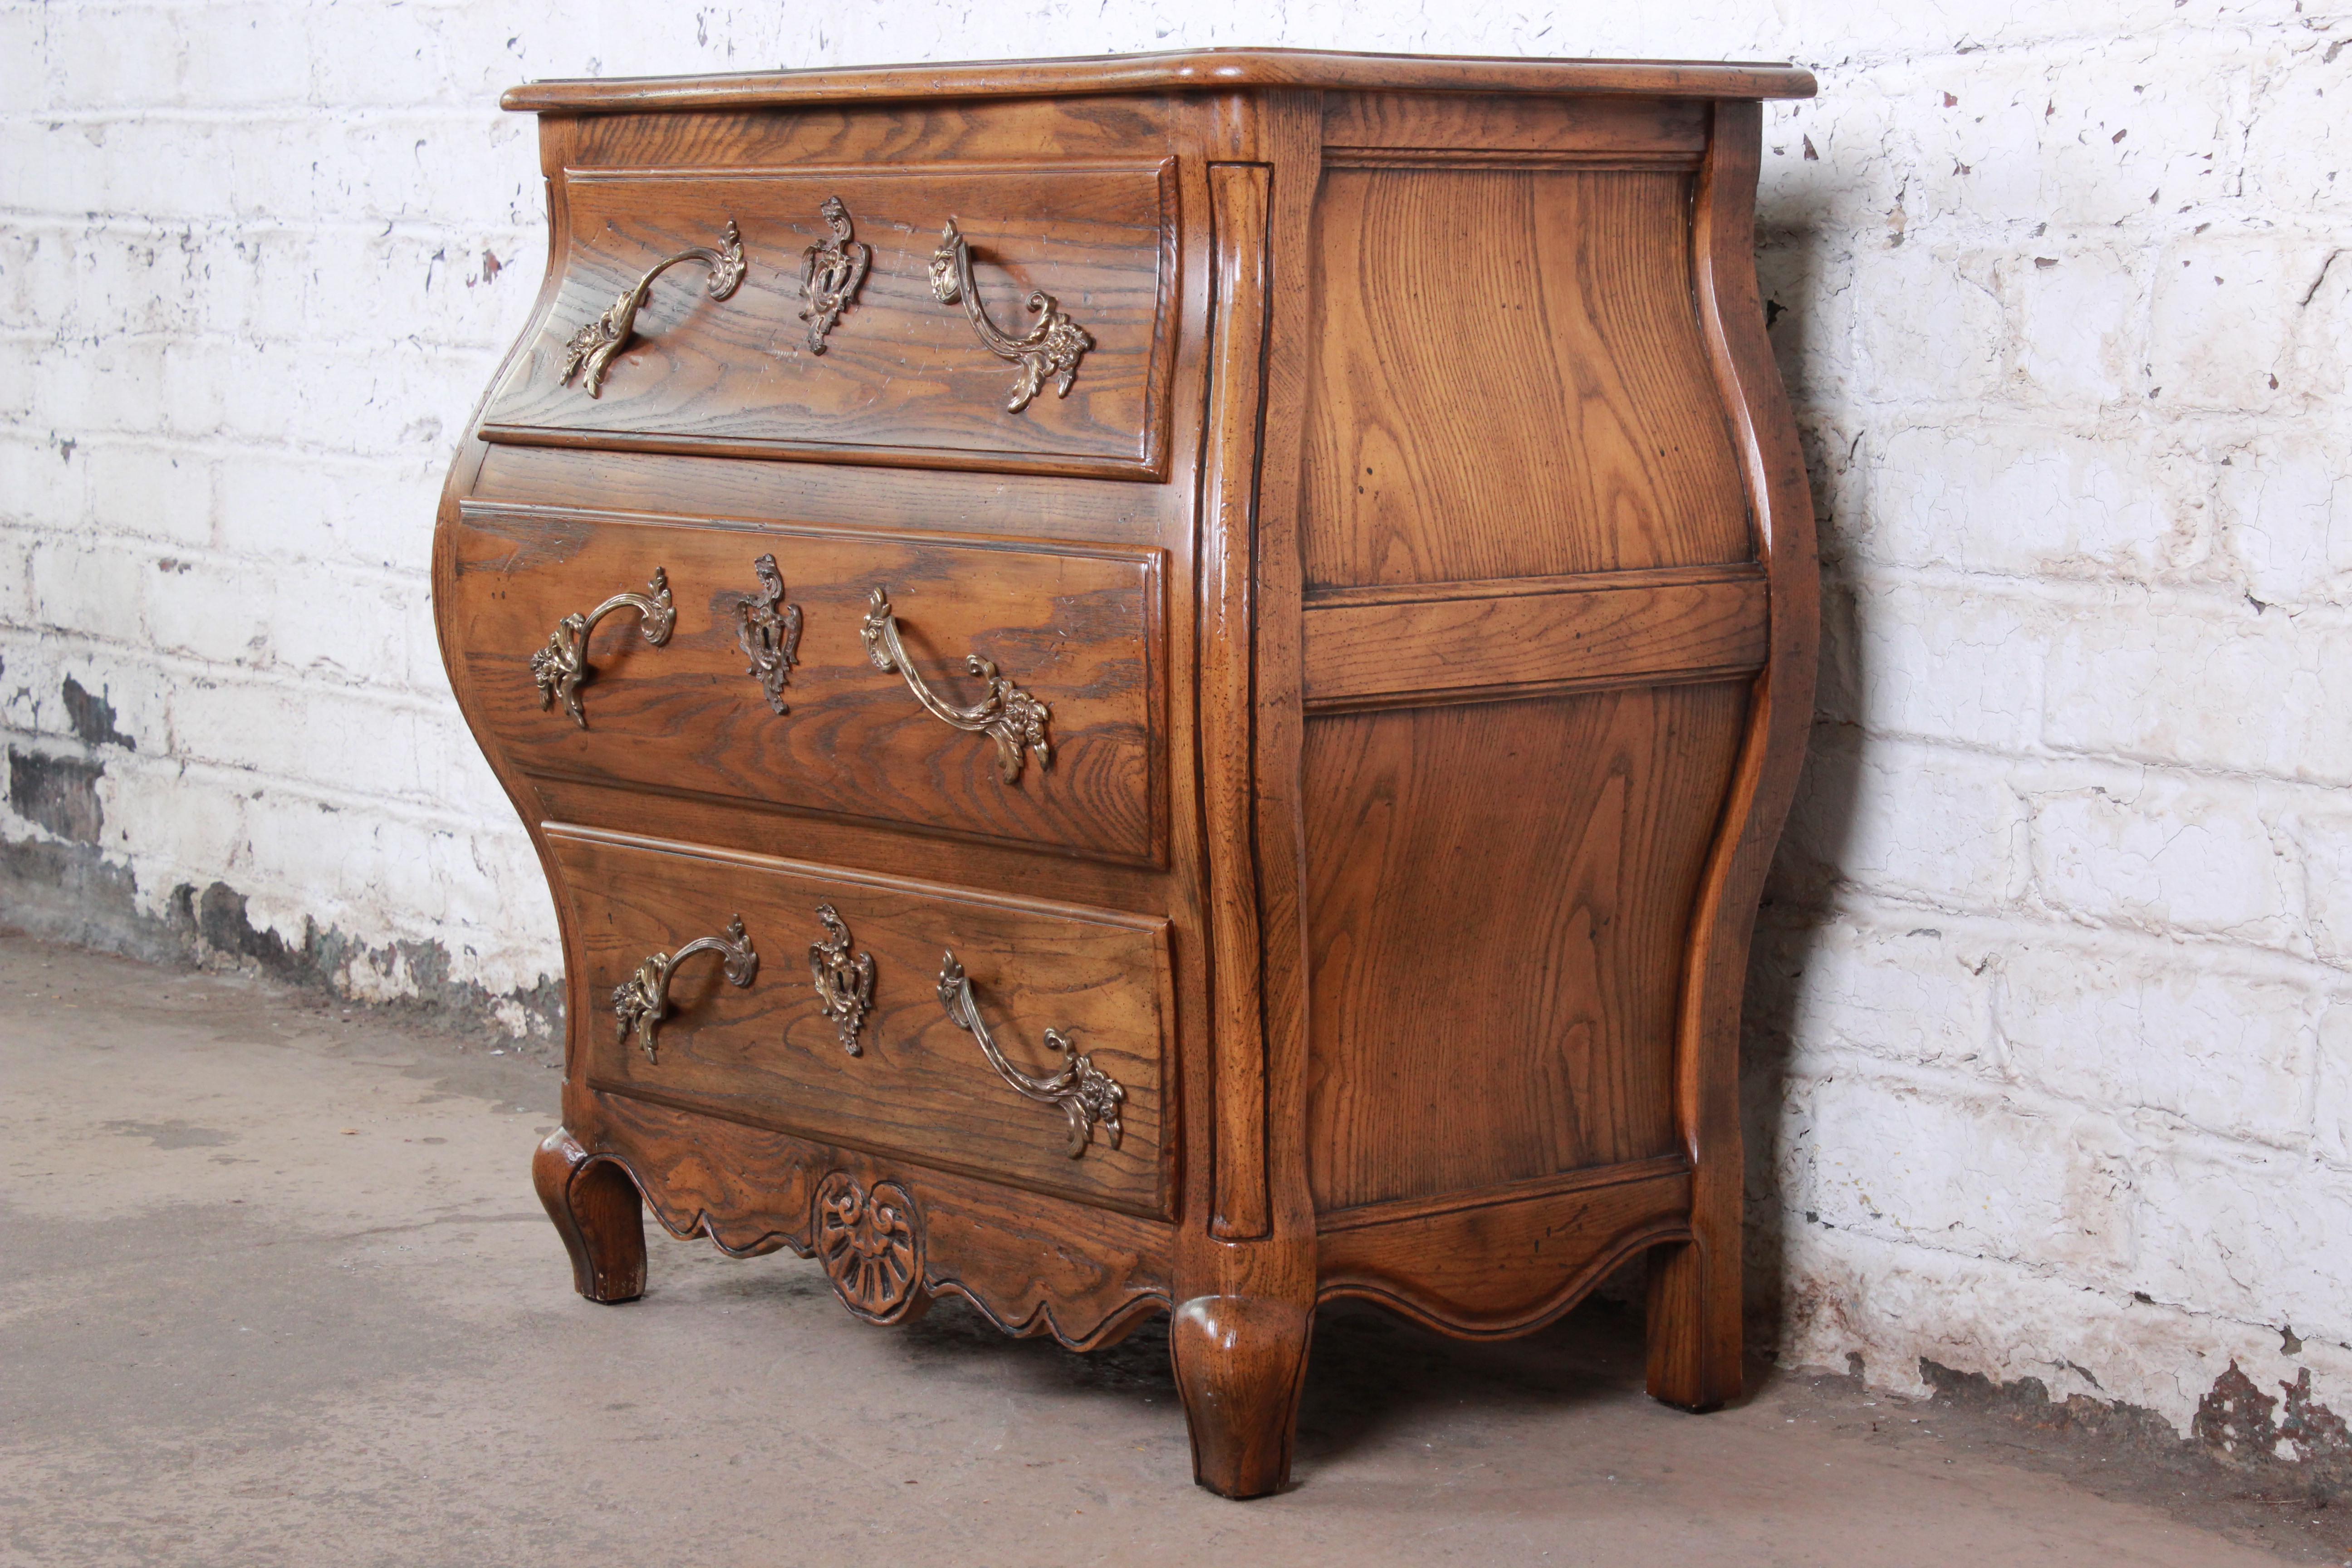 An exceptional French Provincial Louis XV style commode or bombay chest by Baker Furniture. The chest features solid oak construction, with beautiful wood grain and nice carved details. It offers good storage, with three deep dovetailed drawers.